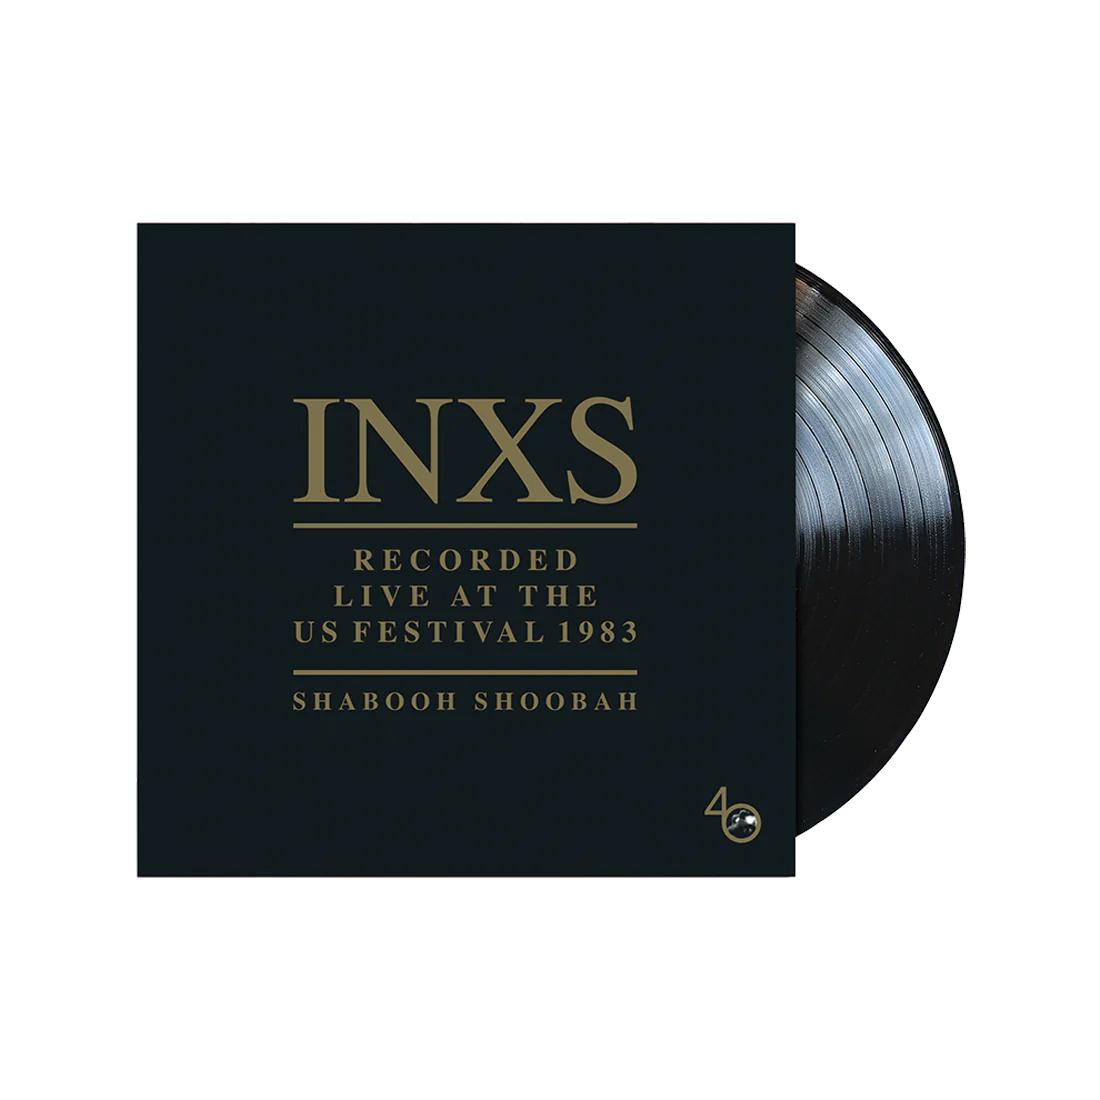 INXS - Recorded Live At The US Festival 1983 (Shabooh Shoobah)